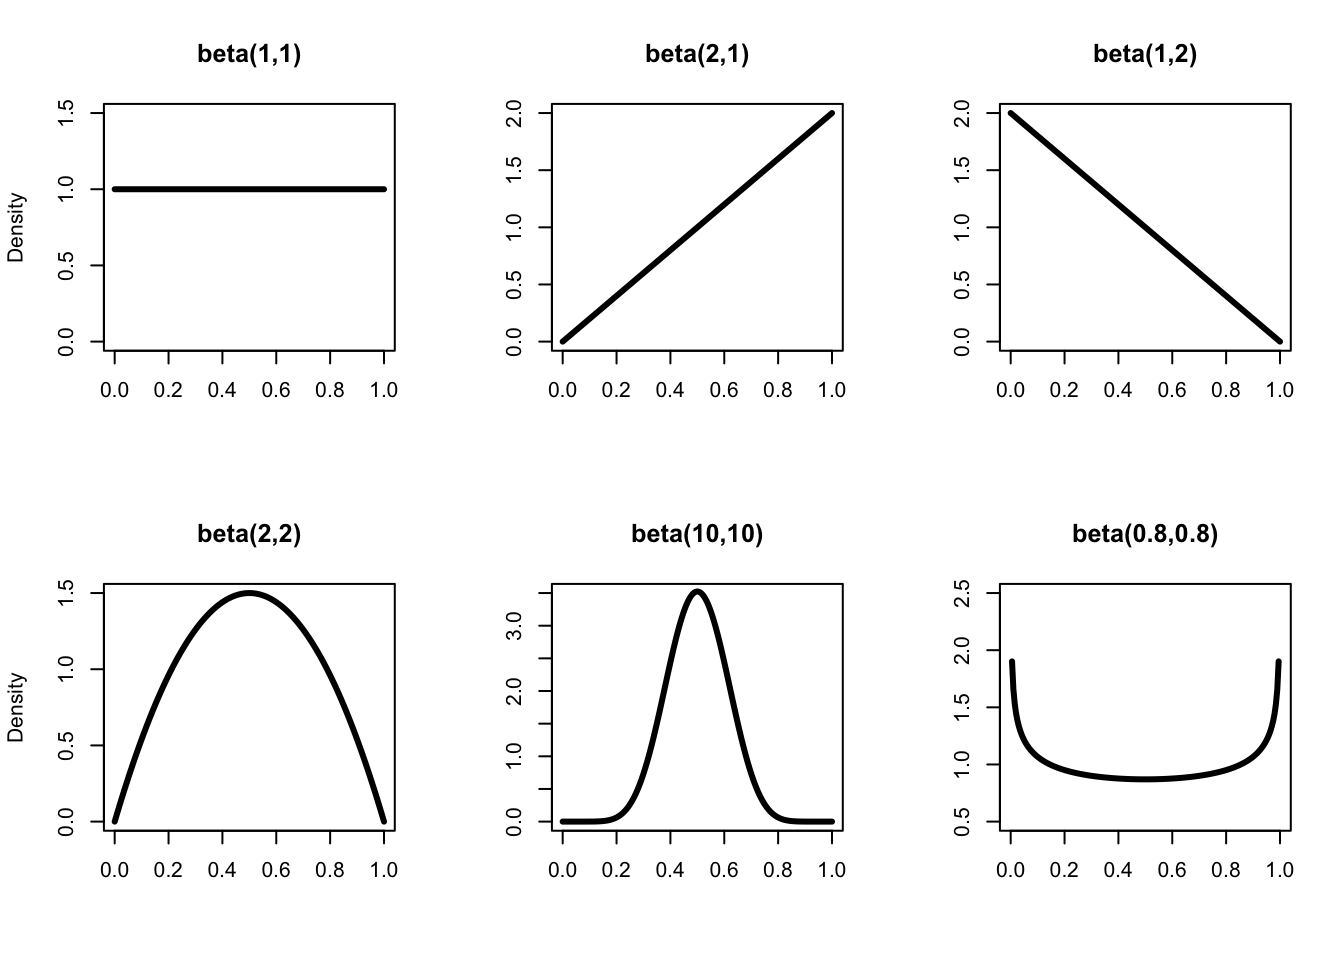 The distribution beta(\(a\),\(b\)) for different values of \(a\) and \(b\). Note that for \(a = b = 1\), we get the uniform distribution between 0 and 1 in the top left panel. When \(a\) and \(b\) are equal, the distribution is symmetric, and the bigger \(a\) and \(b\), the more peaked the distribution or the smaller the variance.